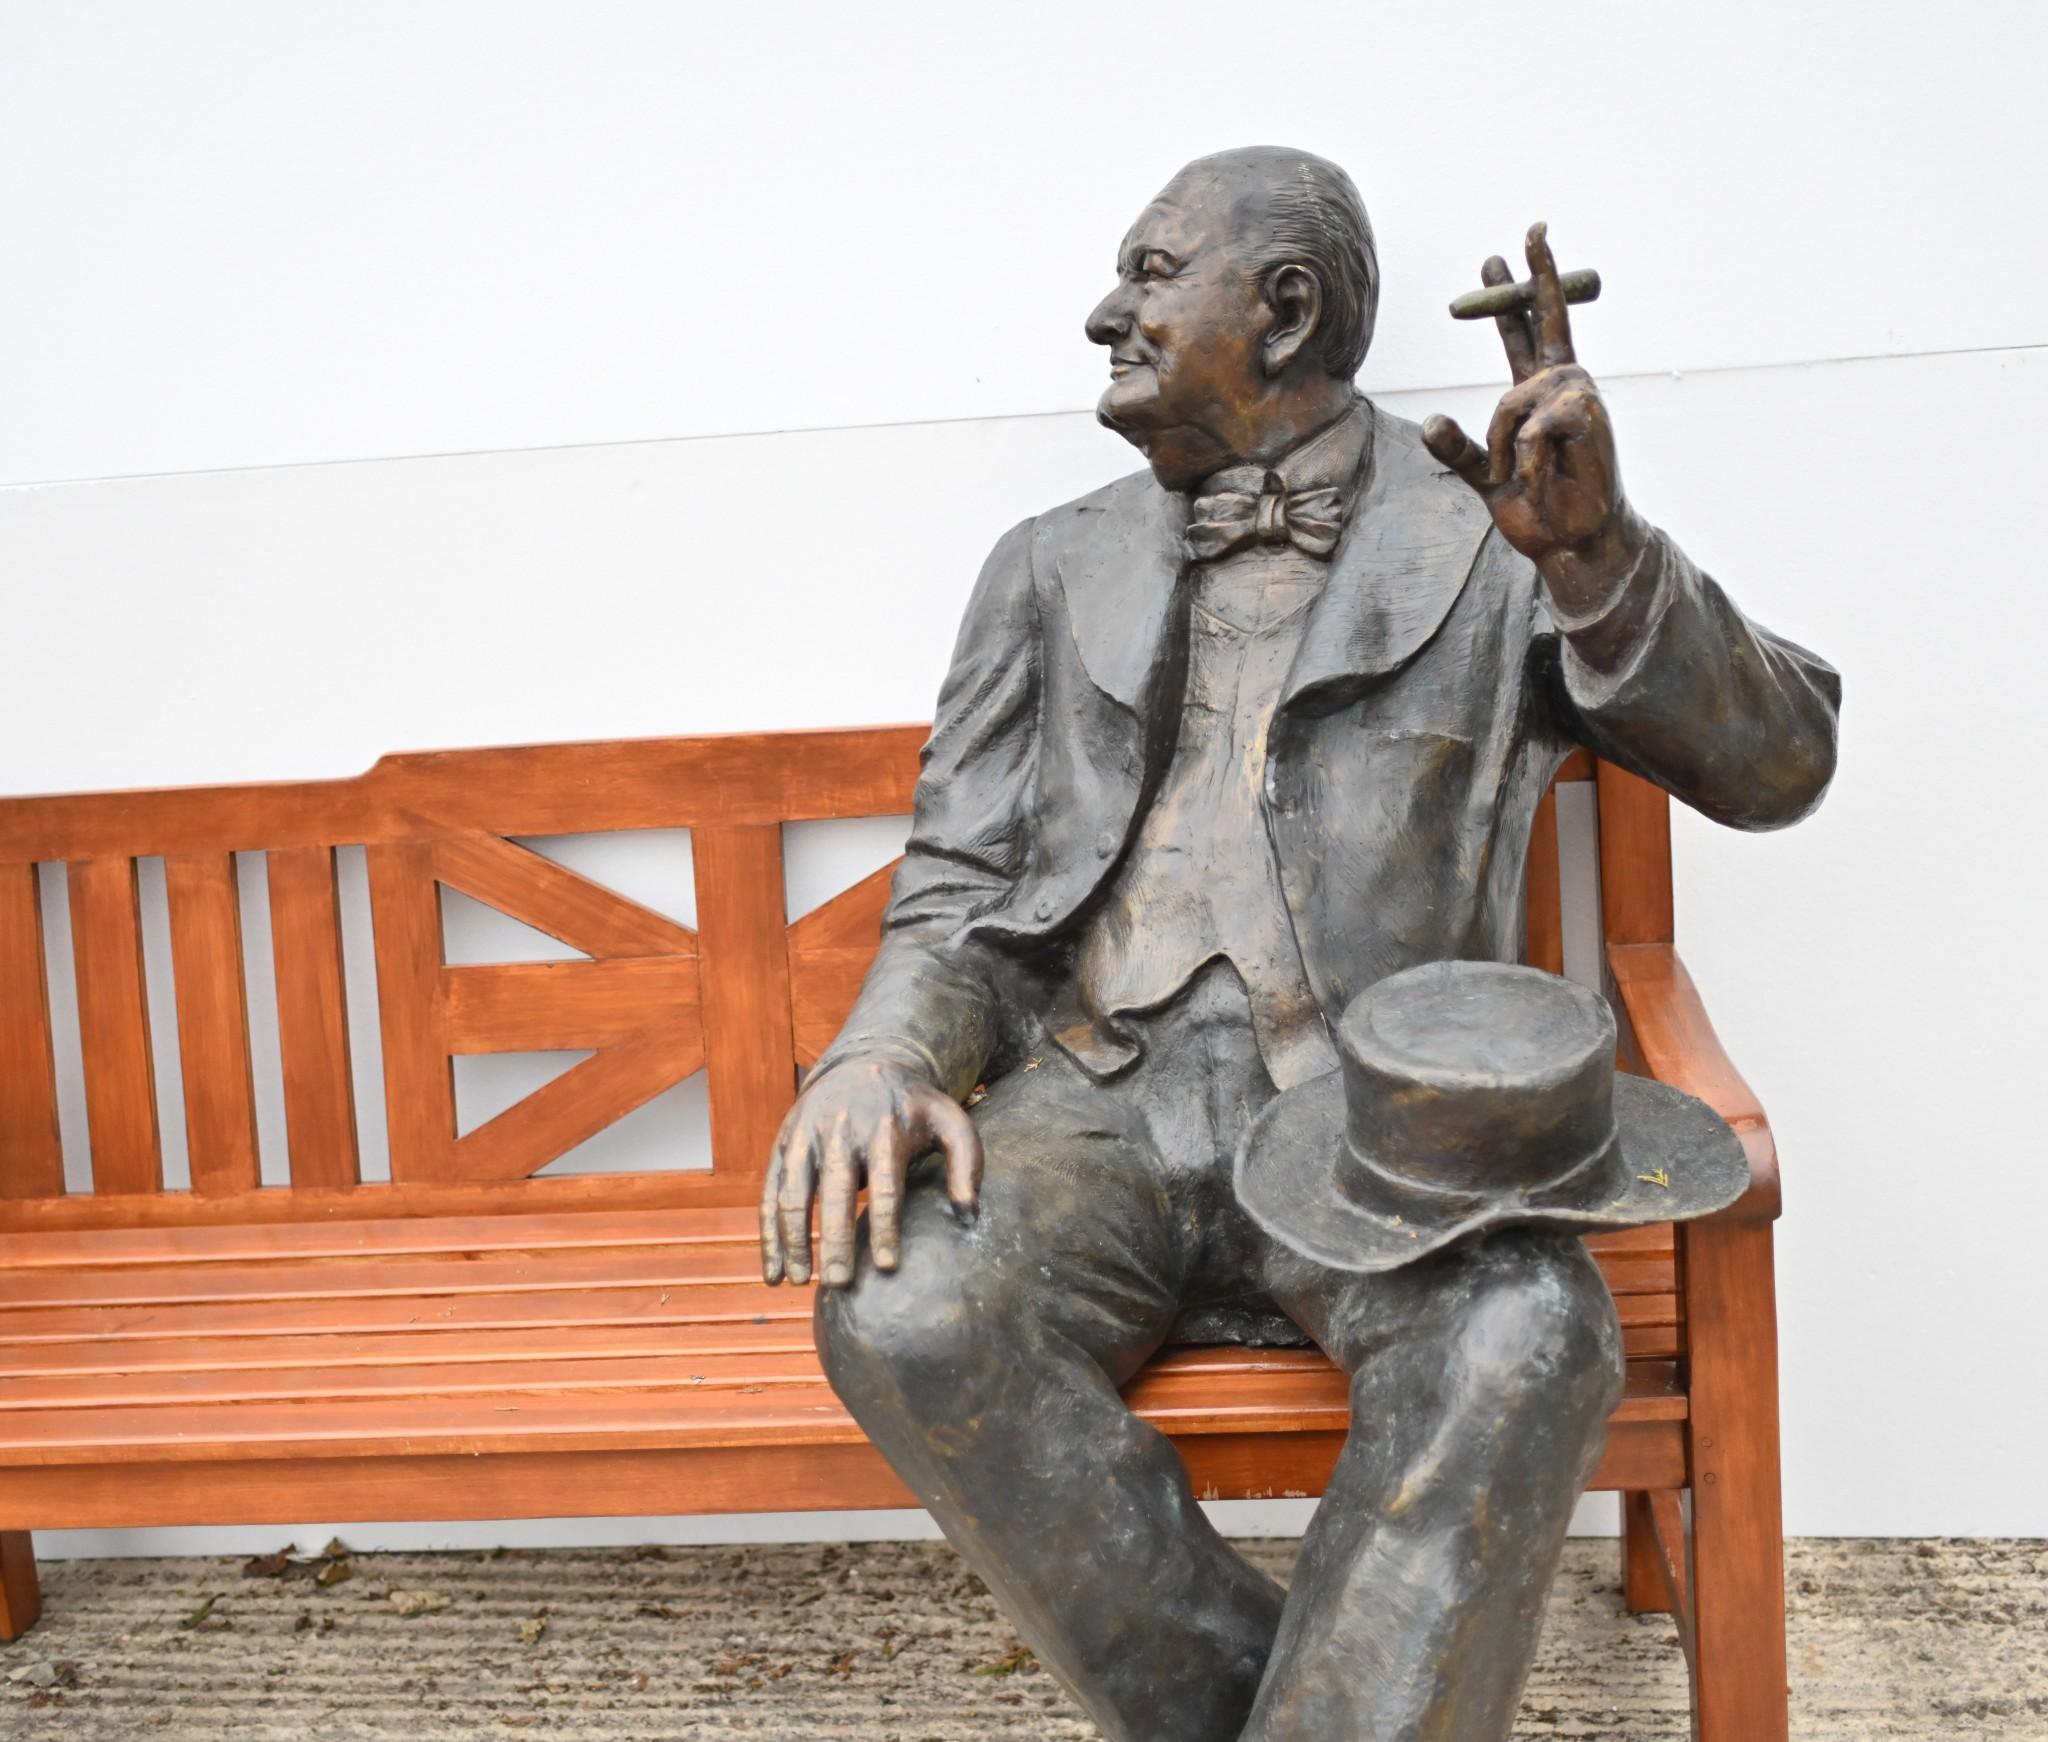 We'll fight them on the benches!
You are viewing a wonderful bronze casting of Sir Winston Churchill sitting on a garden bench
The statue itself is a great size at almost five feet tall - 140CM
It's a classic Winston pose with his V for Victory sign